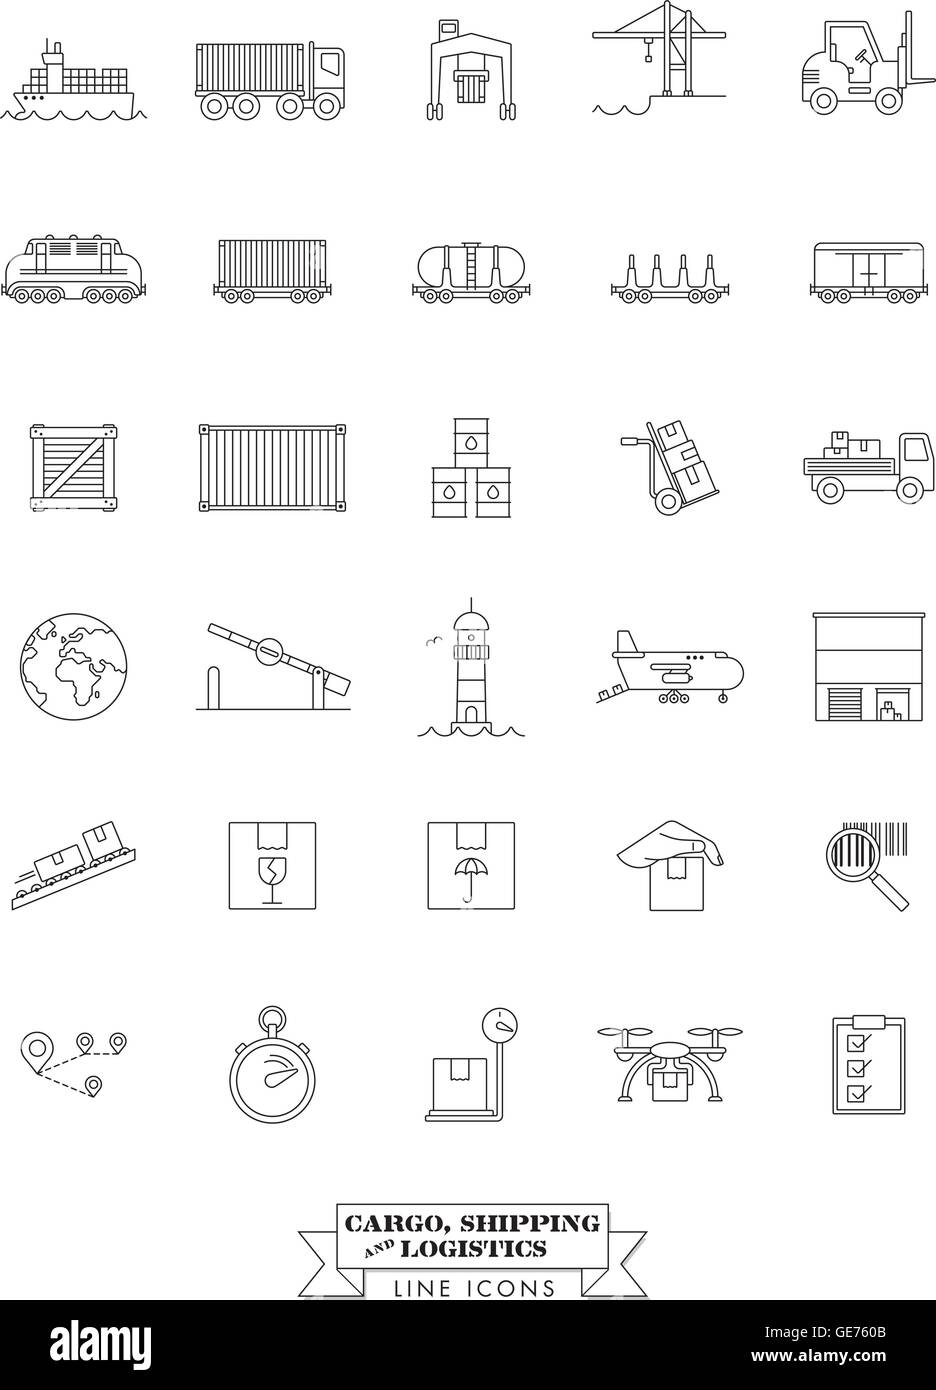 Collection of cargo, shipping, logistics and freight transport line icons Stock Vector